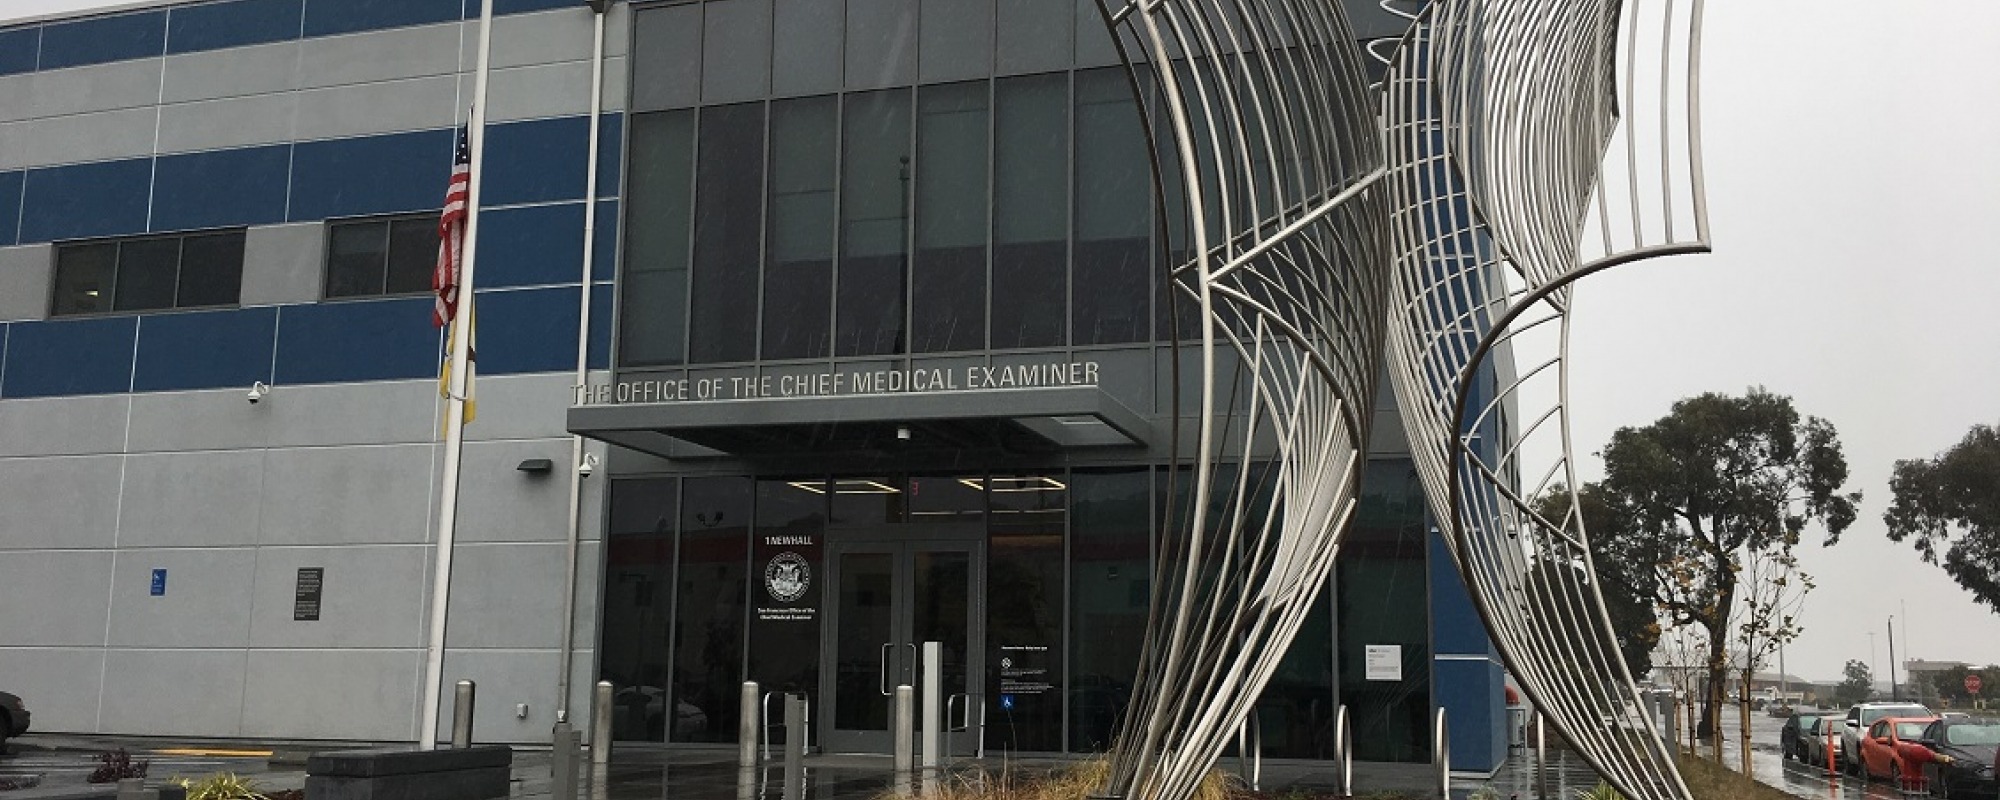 Office of the Chief Medical Examiner | Public Works